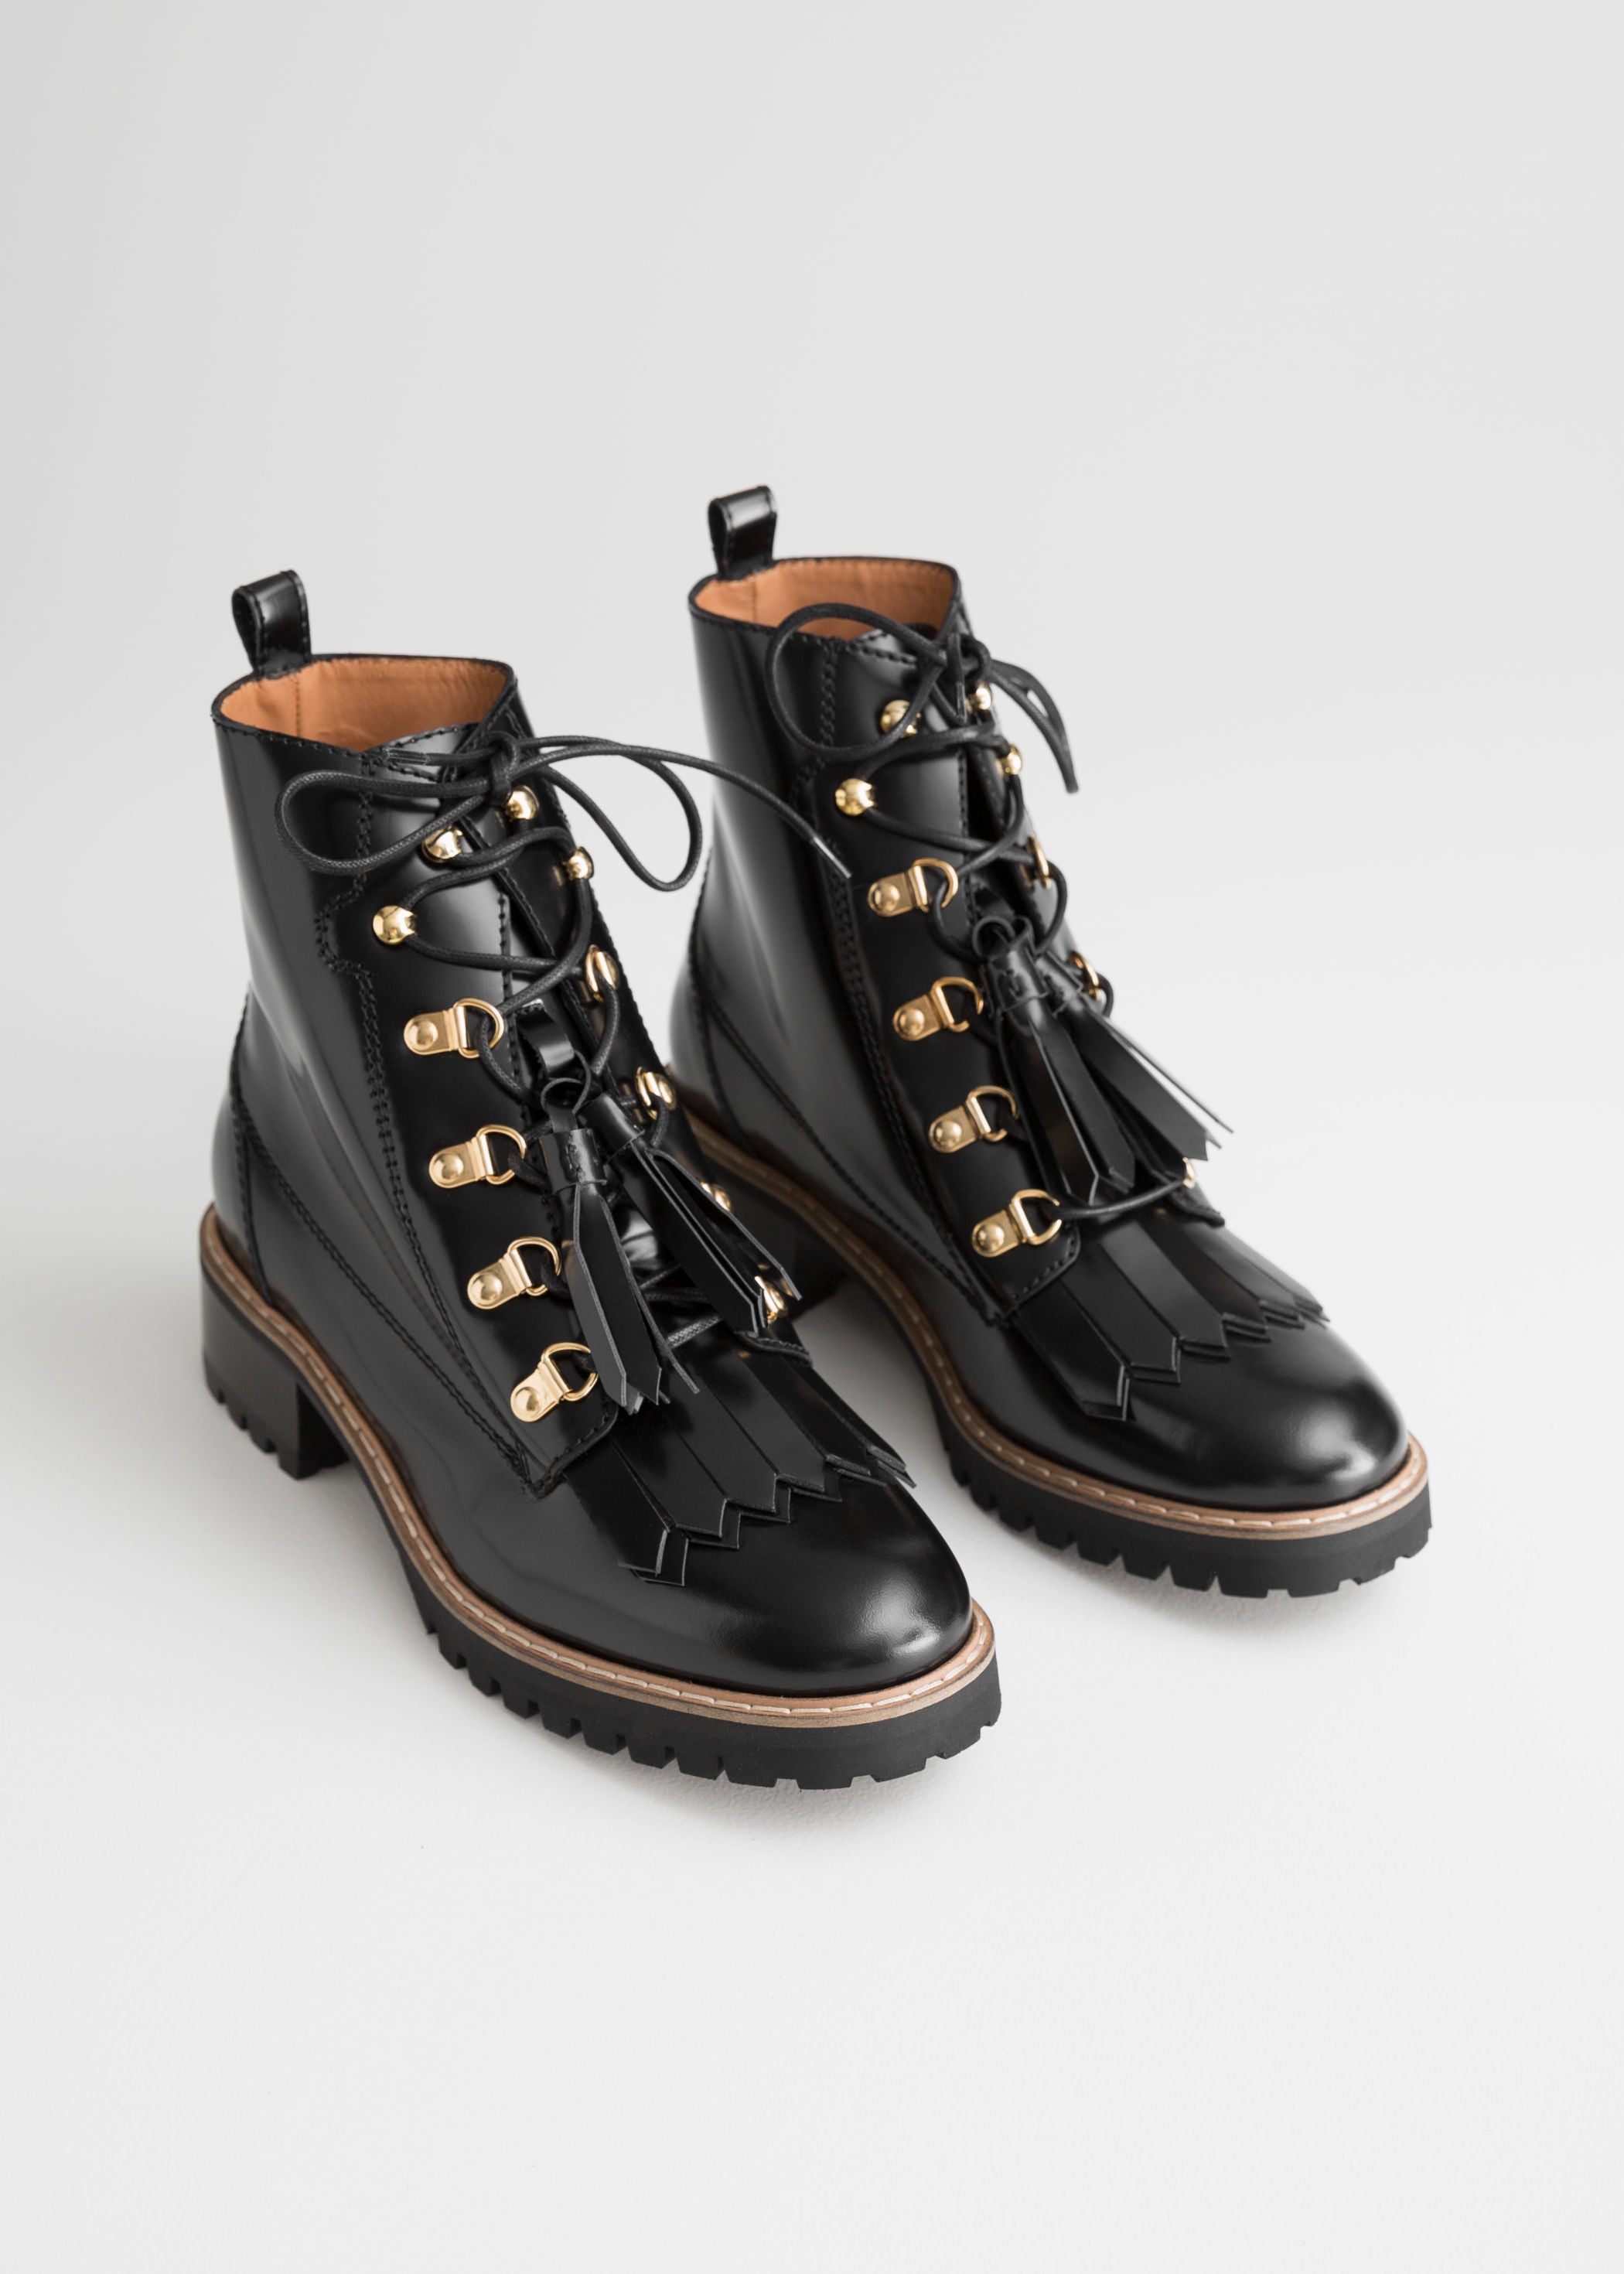 \u0026amp; Other Stories + Tassel Lace Up Boots